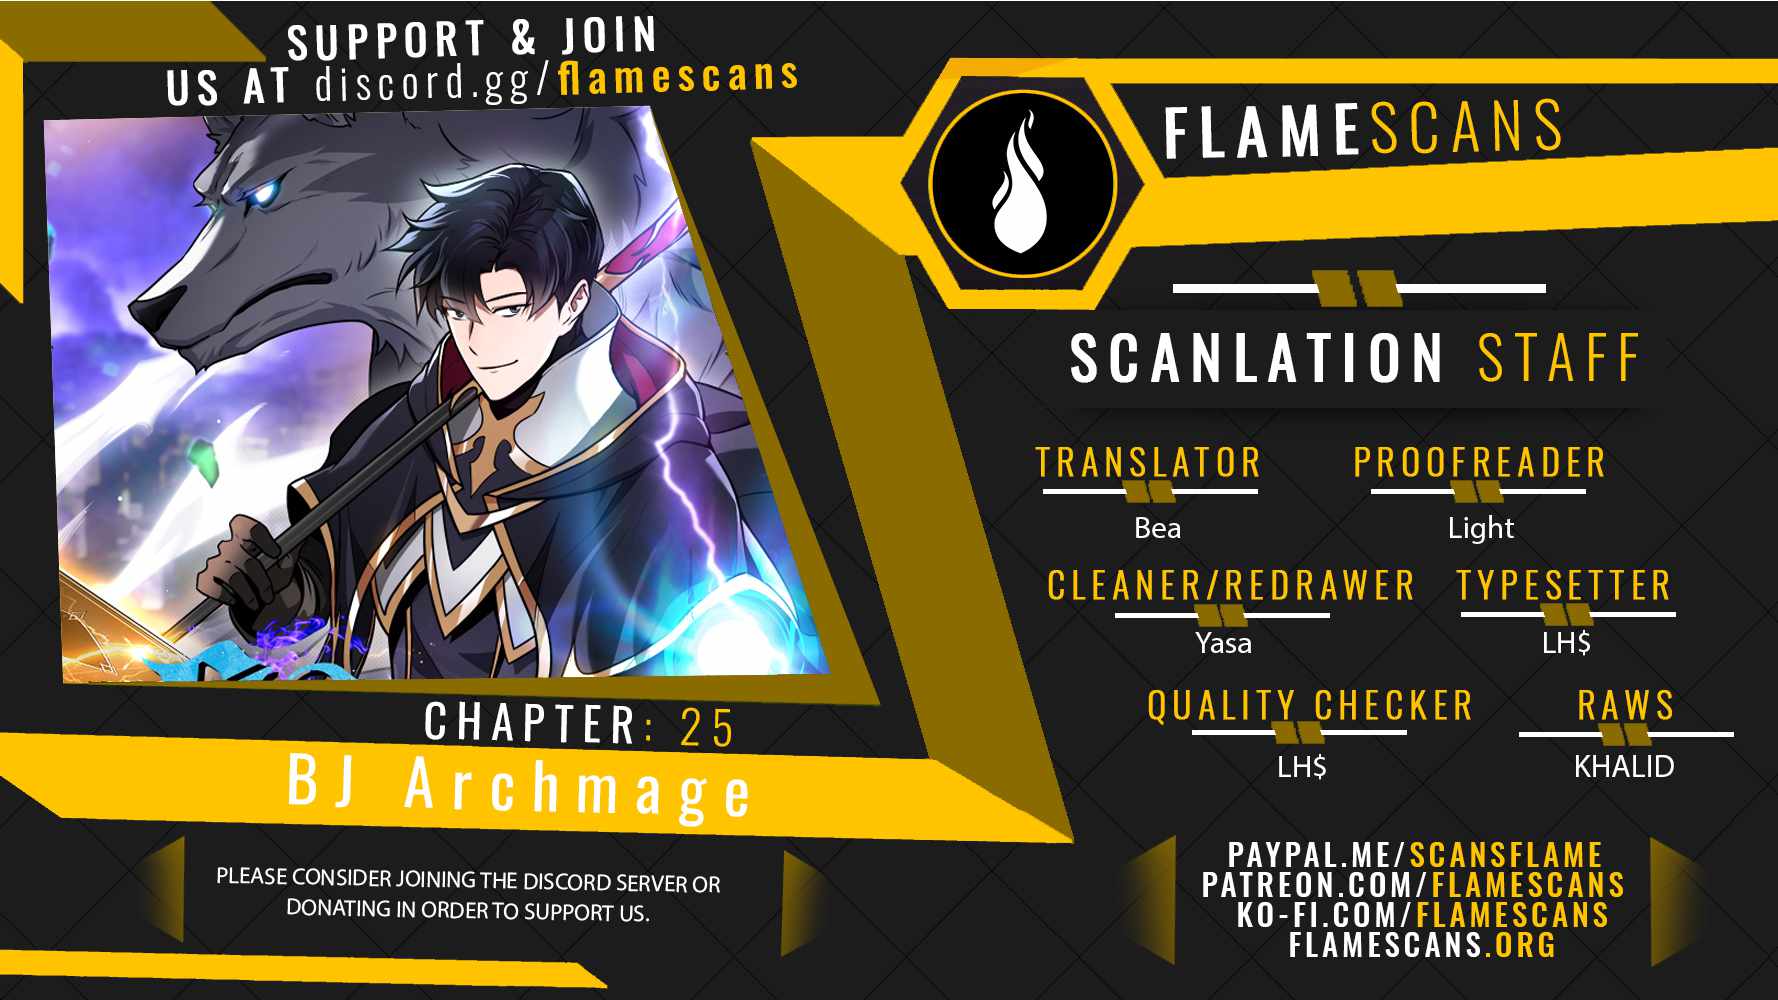 Archmage Streamer chapter 25